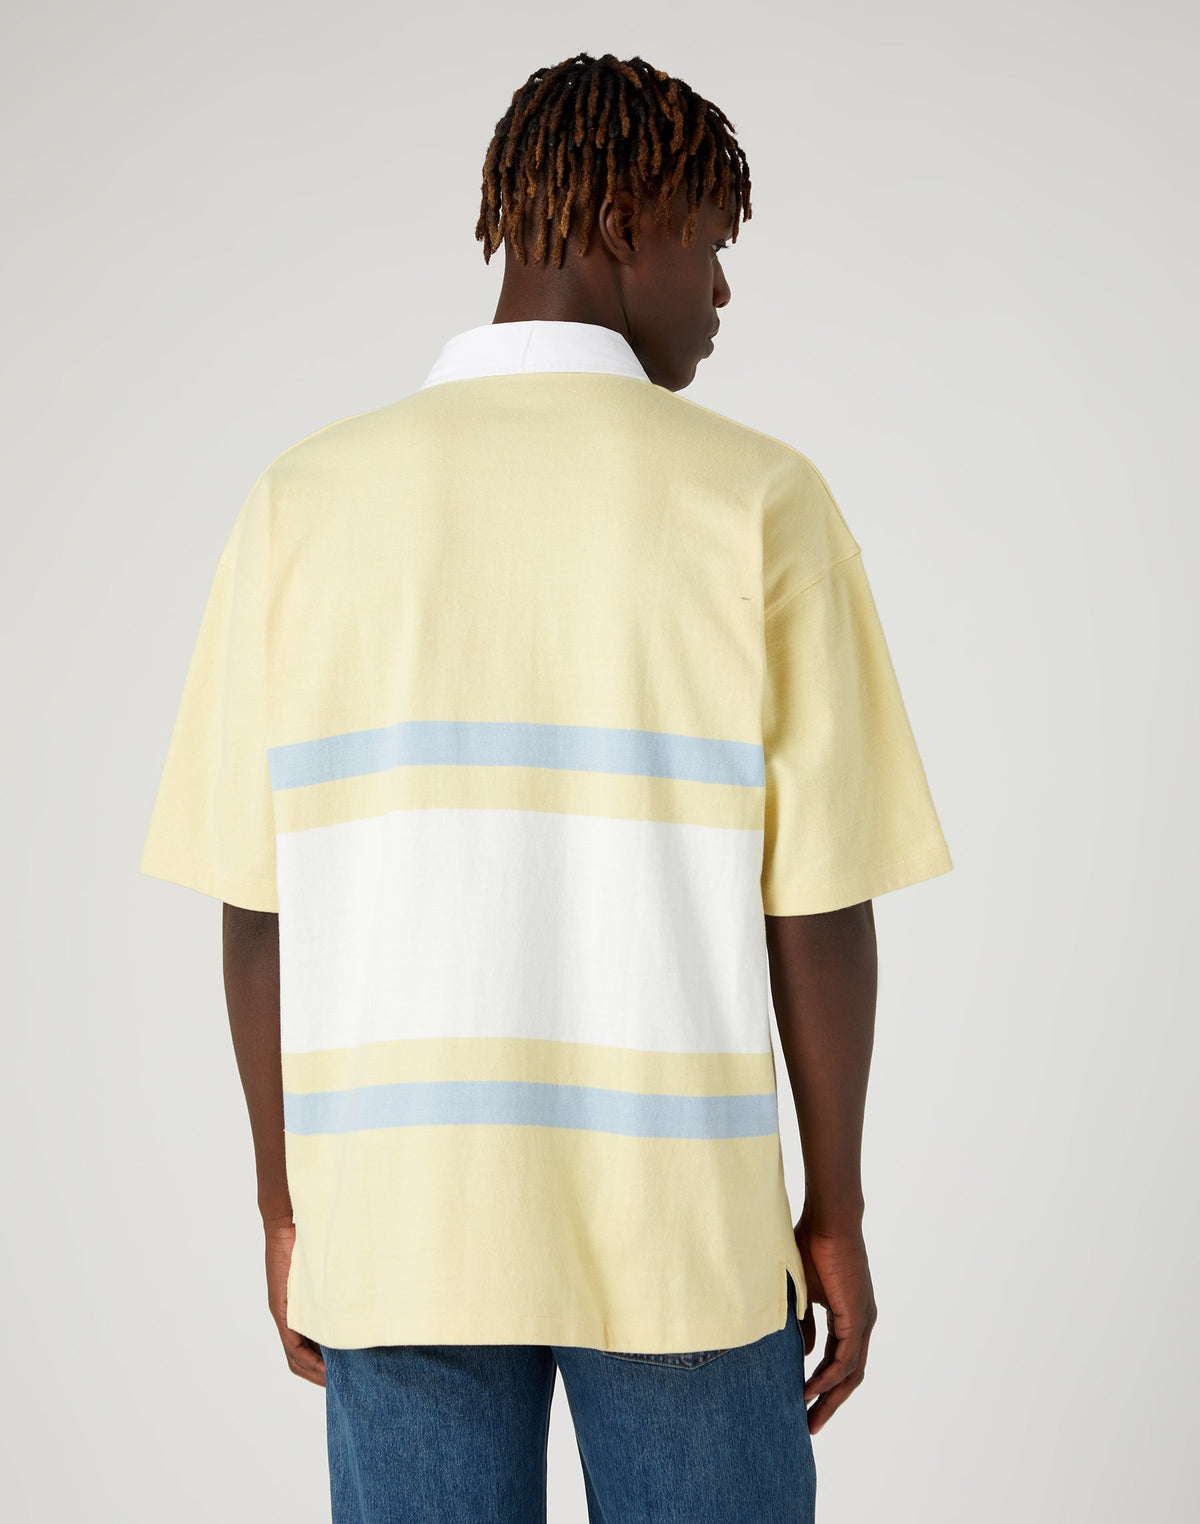 Rugby Polo Shirt in Pineapple Slice